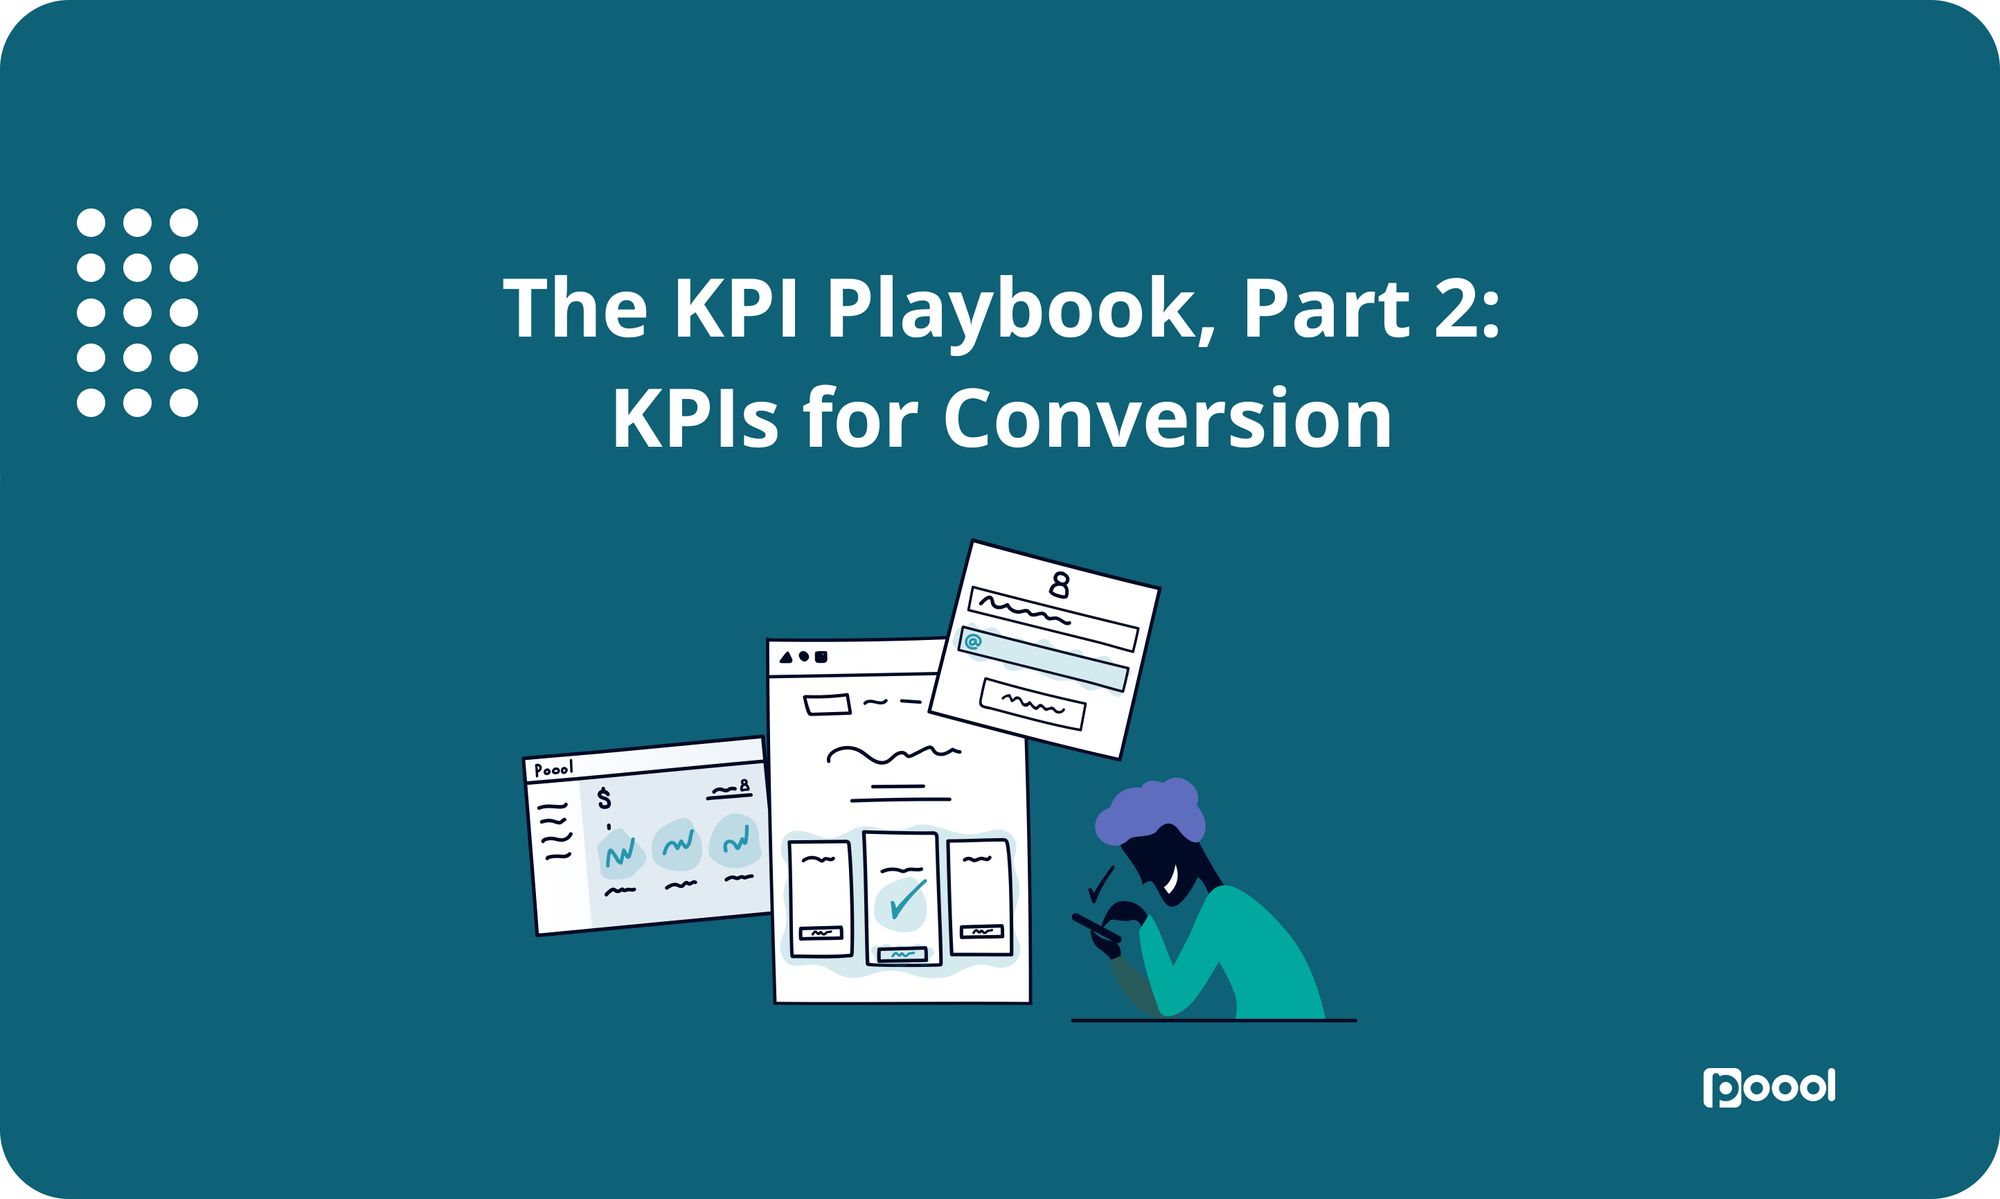 KPIs for Conversion.